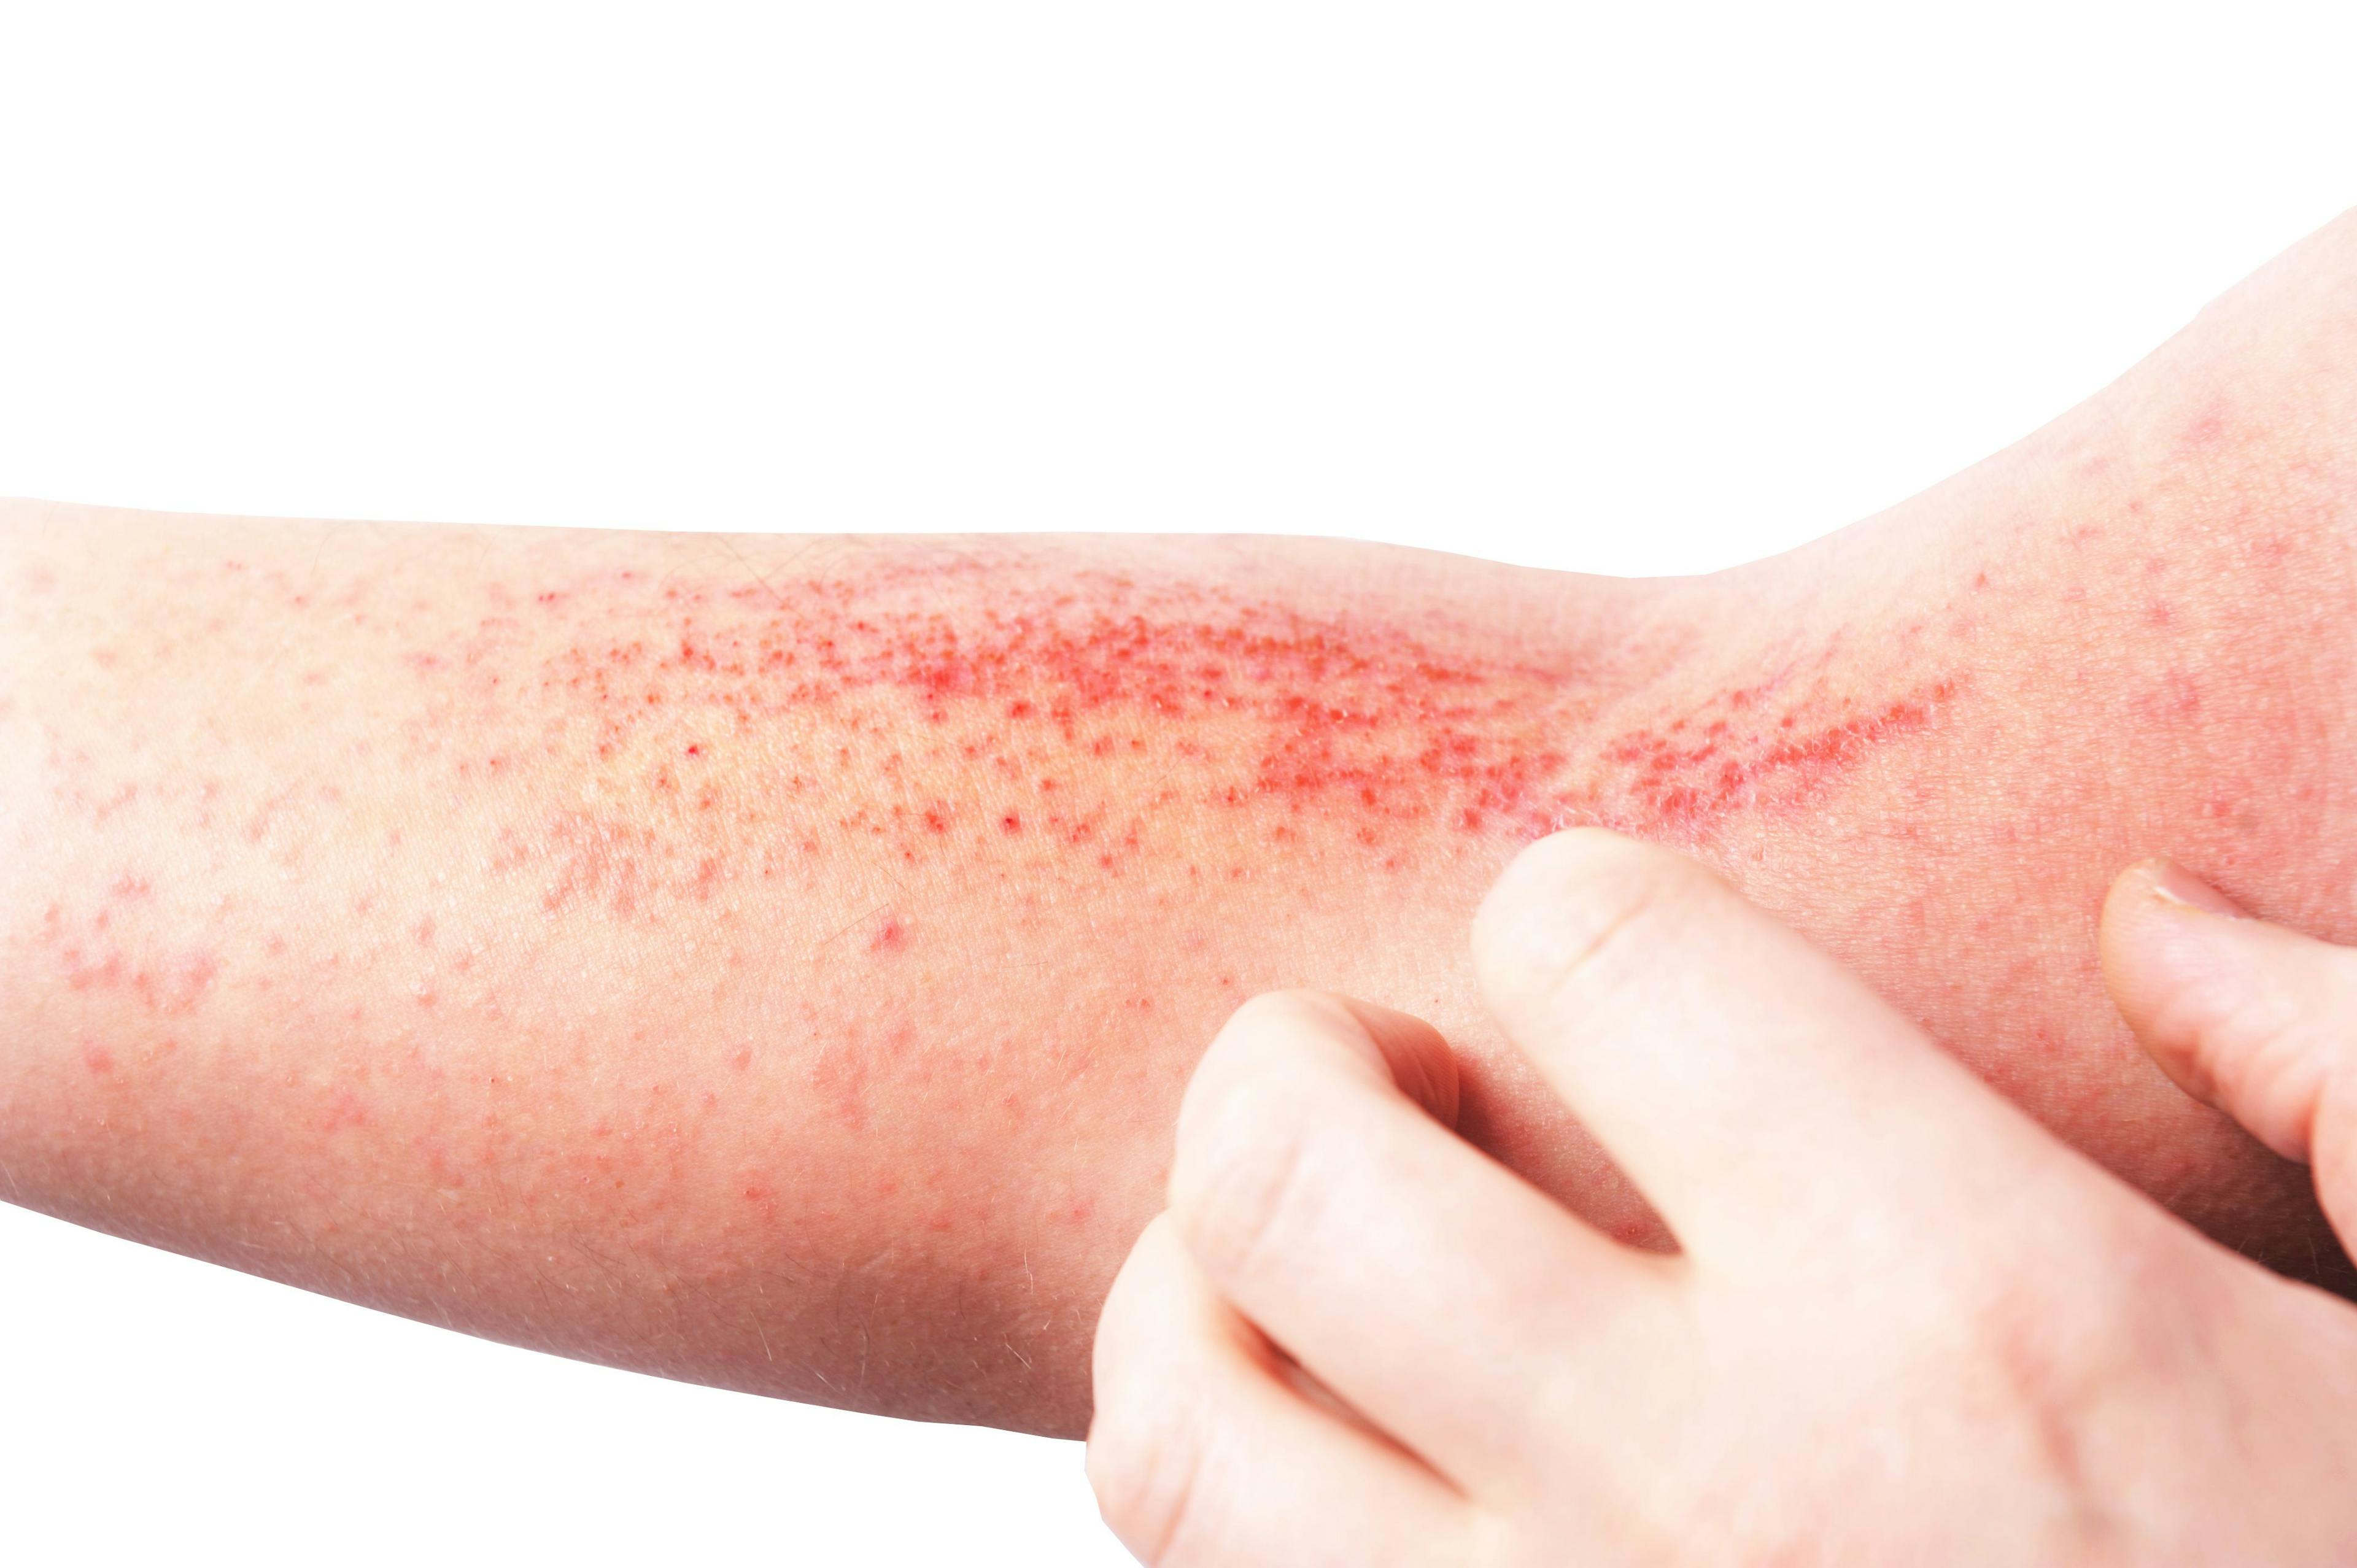 Patient scratching atopic dermatitis on their arm. | Image Credit: lial88 - stock.adobe.com